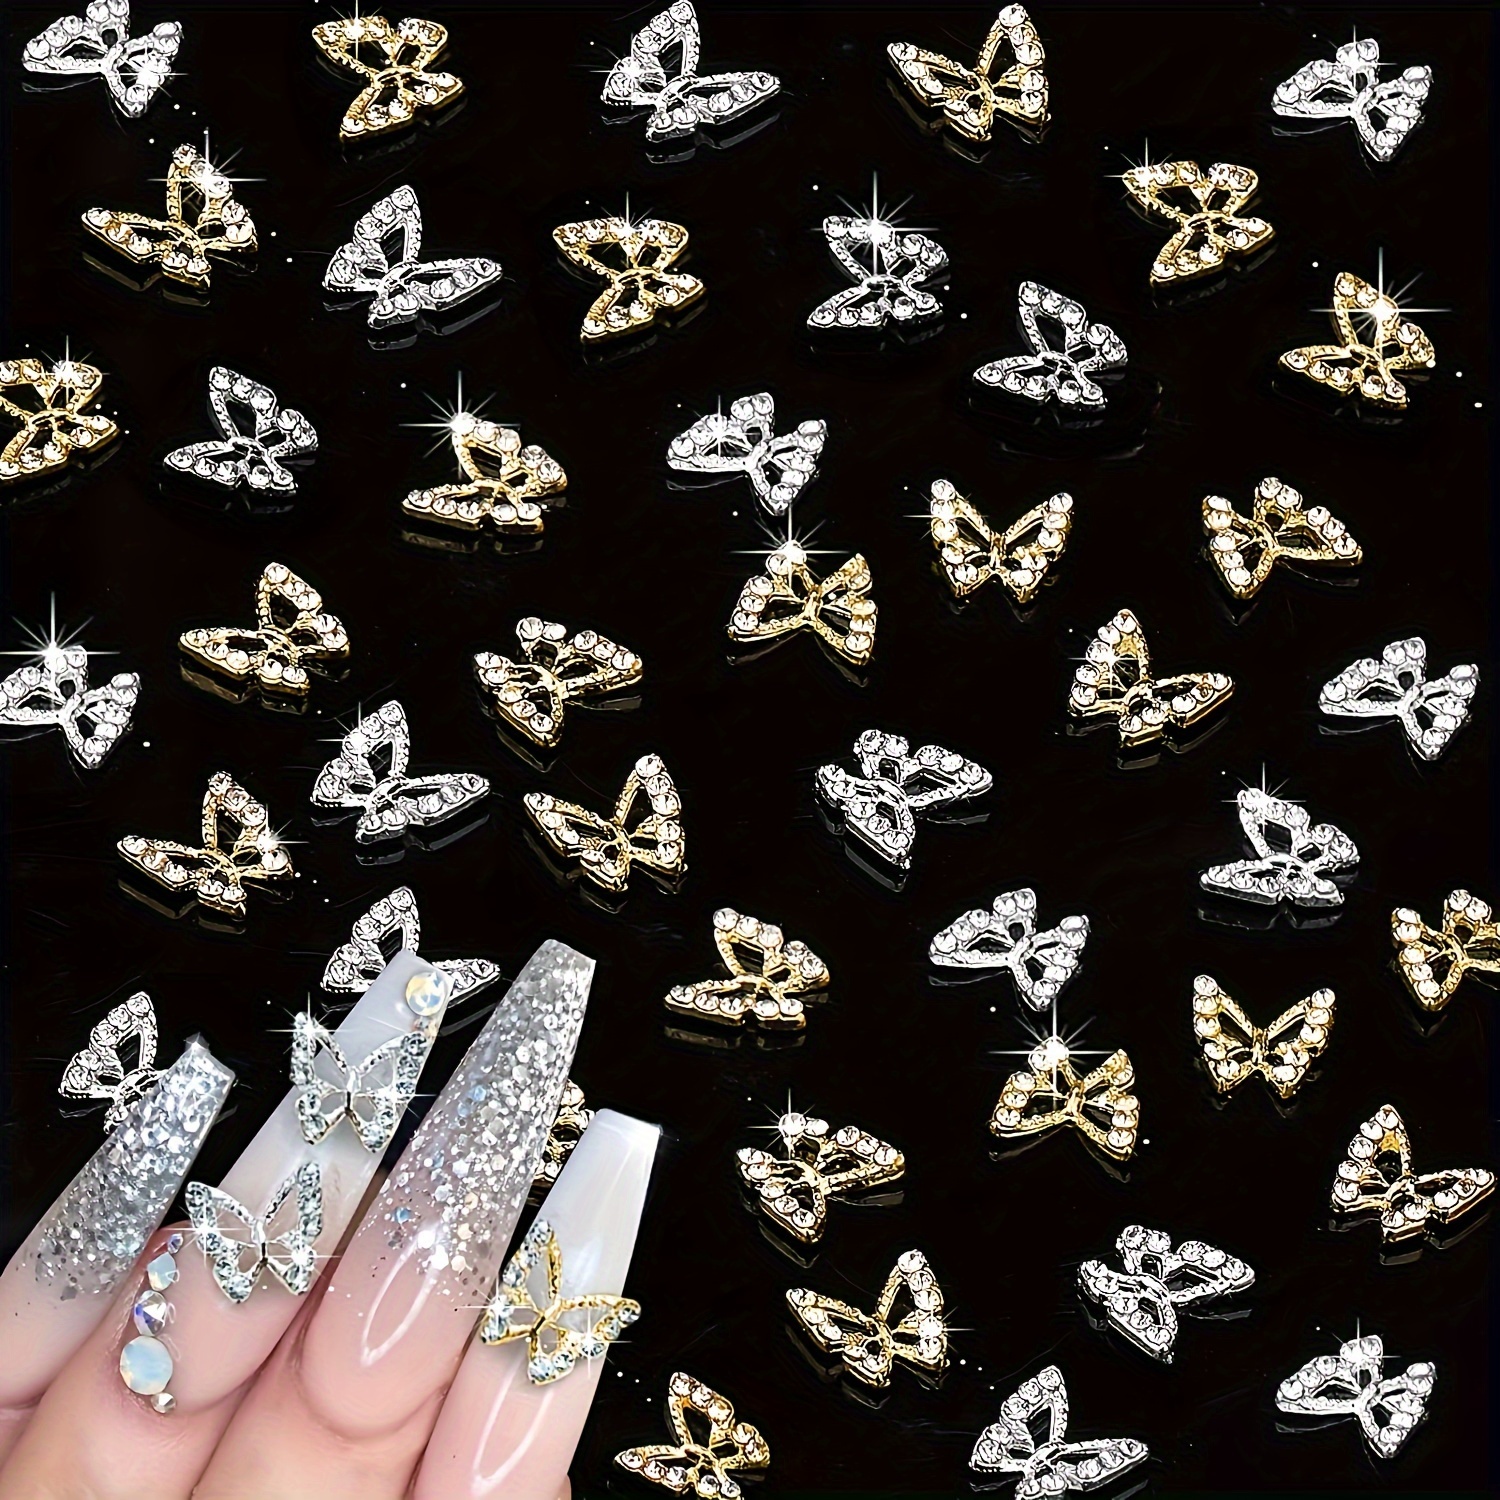 

40-piece Set Of Sparkling 3d Butterfly Nail Charms With Metallic Rhinestones - Scent-free Nail Art Decorations